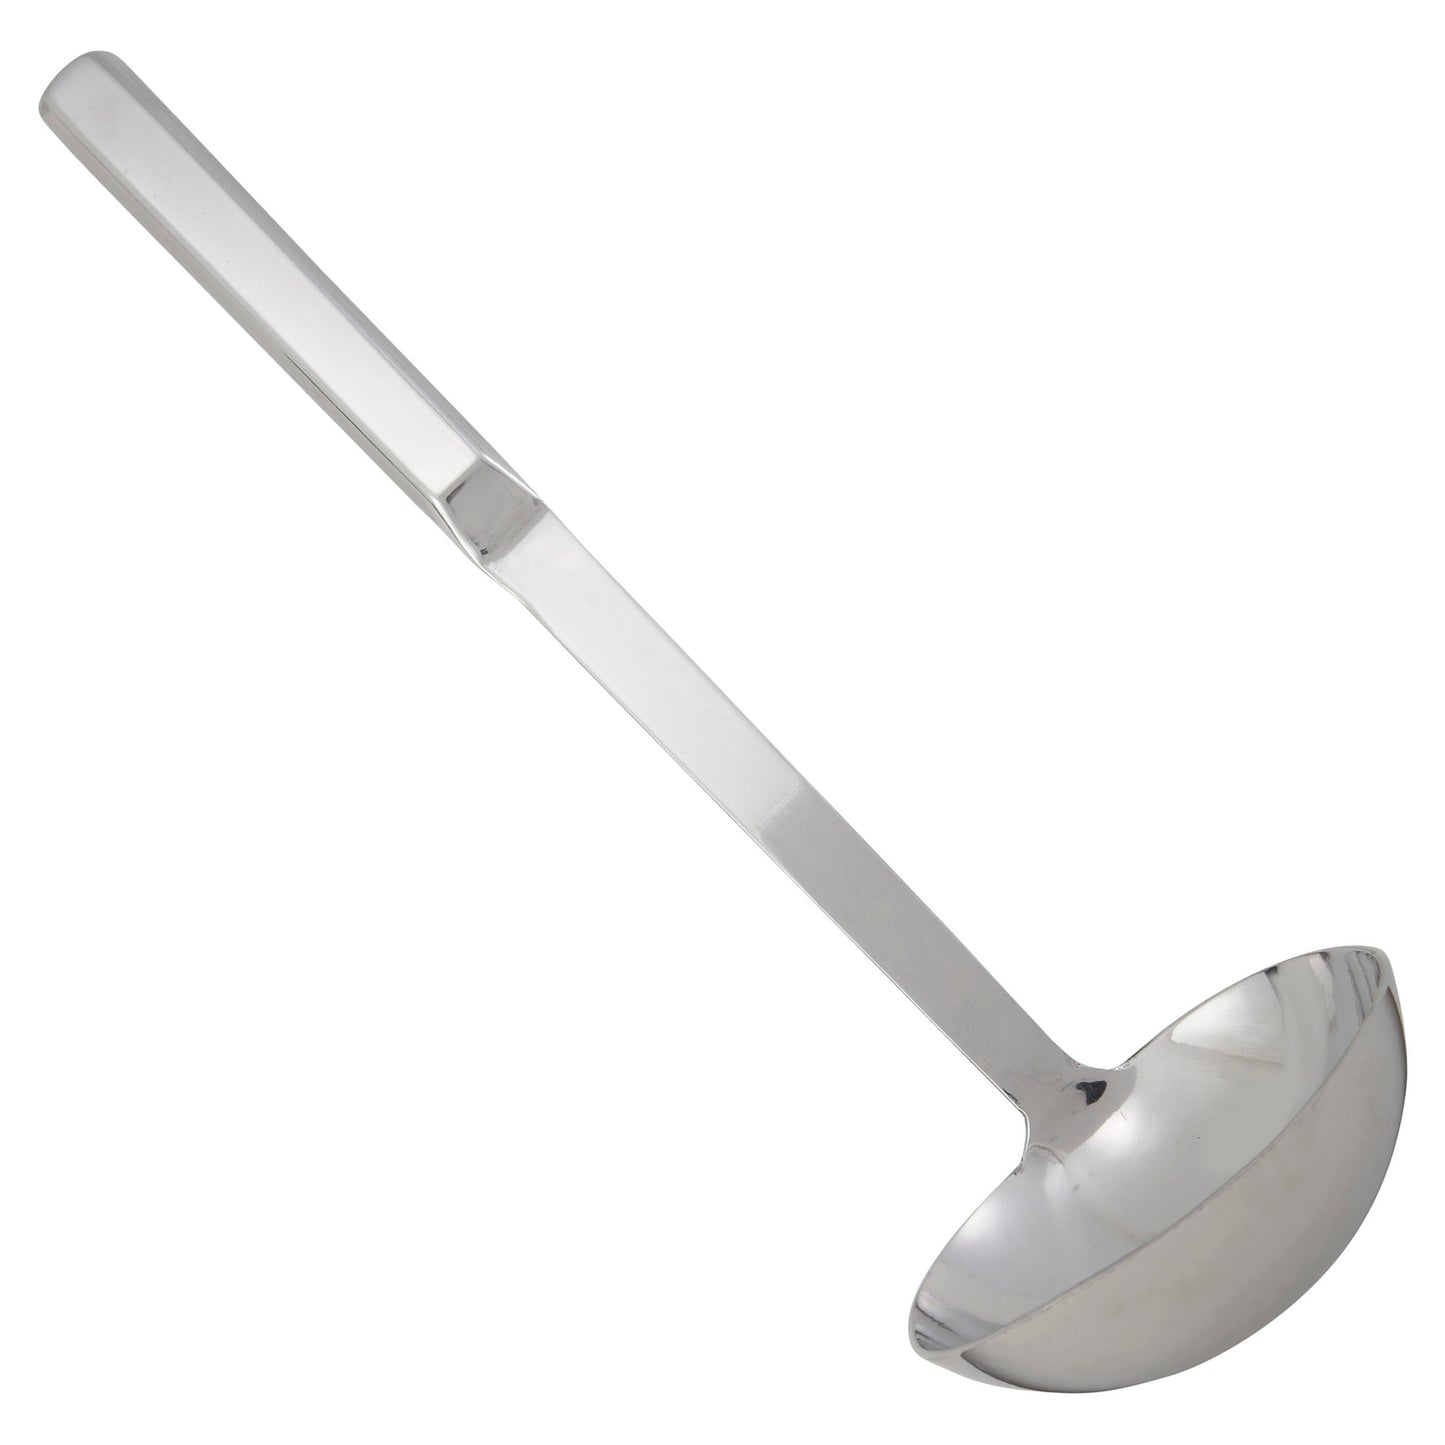 BW-DL - 4 oz Deep Ladle, Hollow Handle, Stainless Steel